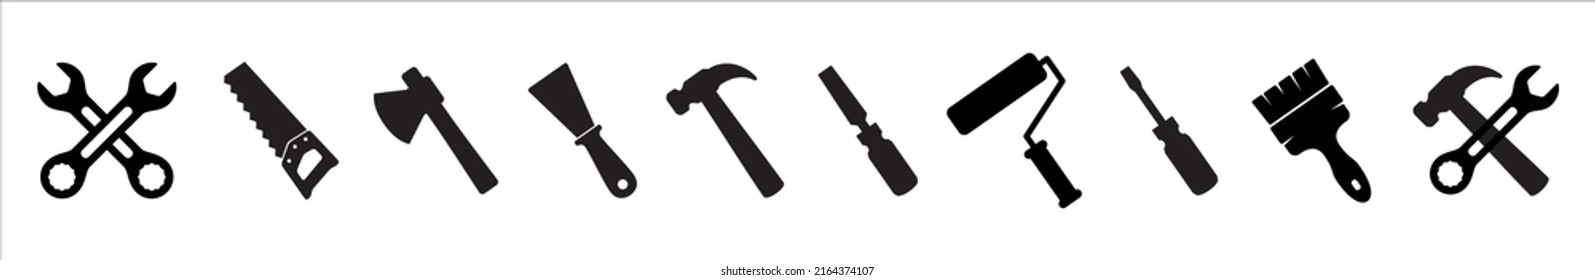 Tools icon set. House and construction tool vector illustration. Carpenter and painting work instrument symbol like wrench, spanner, handsaw, axes, paint roller, hammer, cape and paint brush.